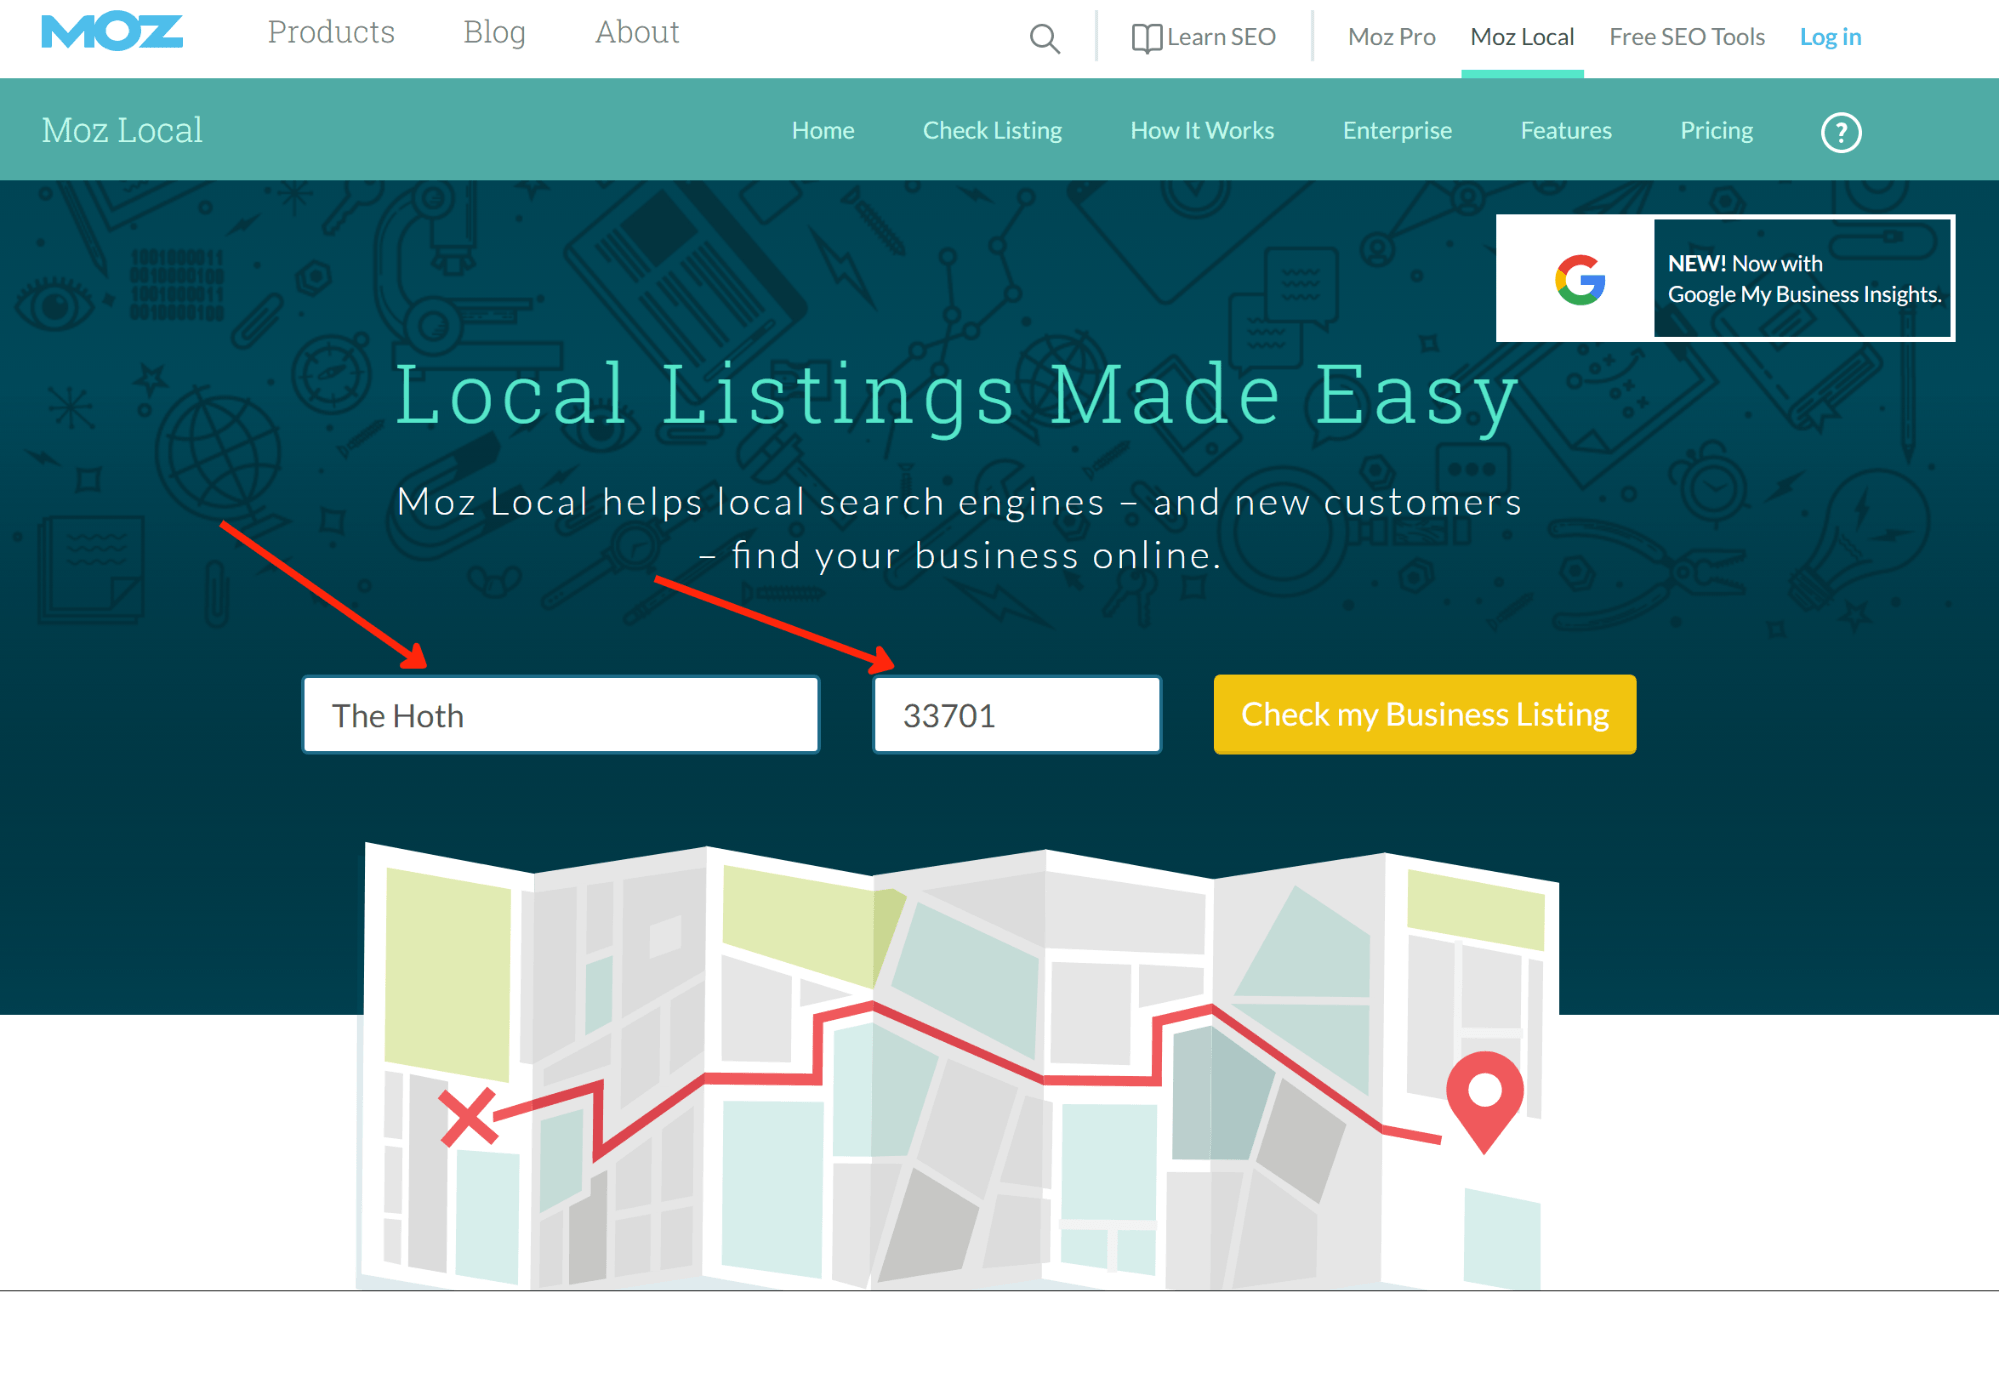 Local featured. Moz local check Business listing. Листинг SEO. Local Tools. Listings.